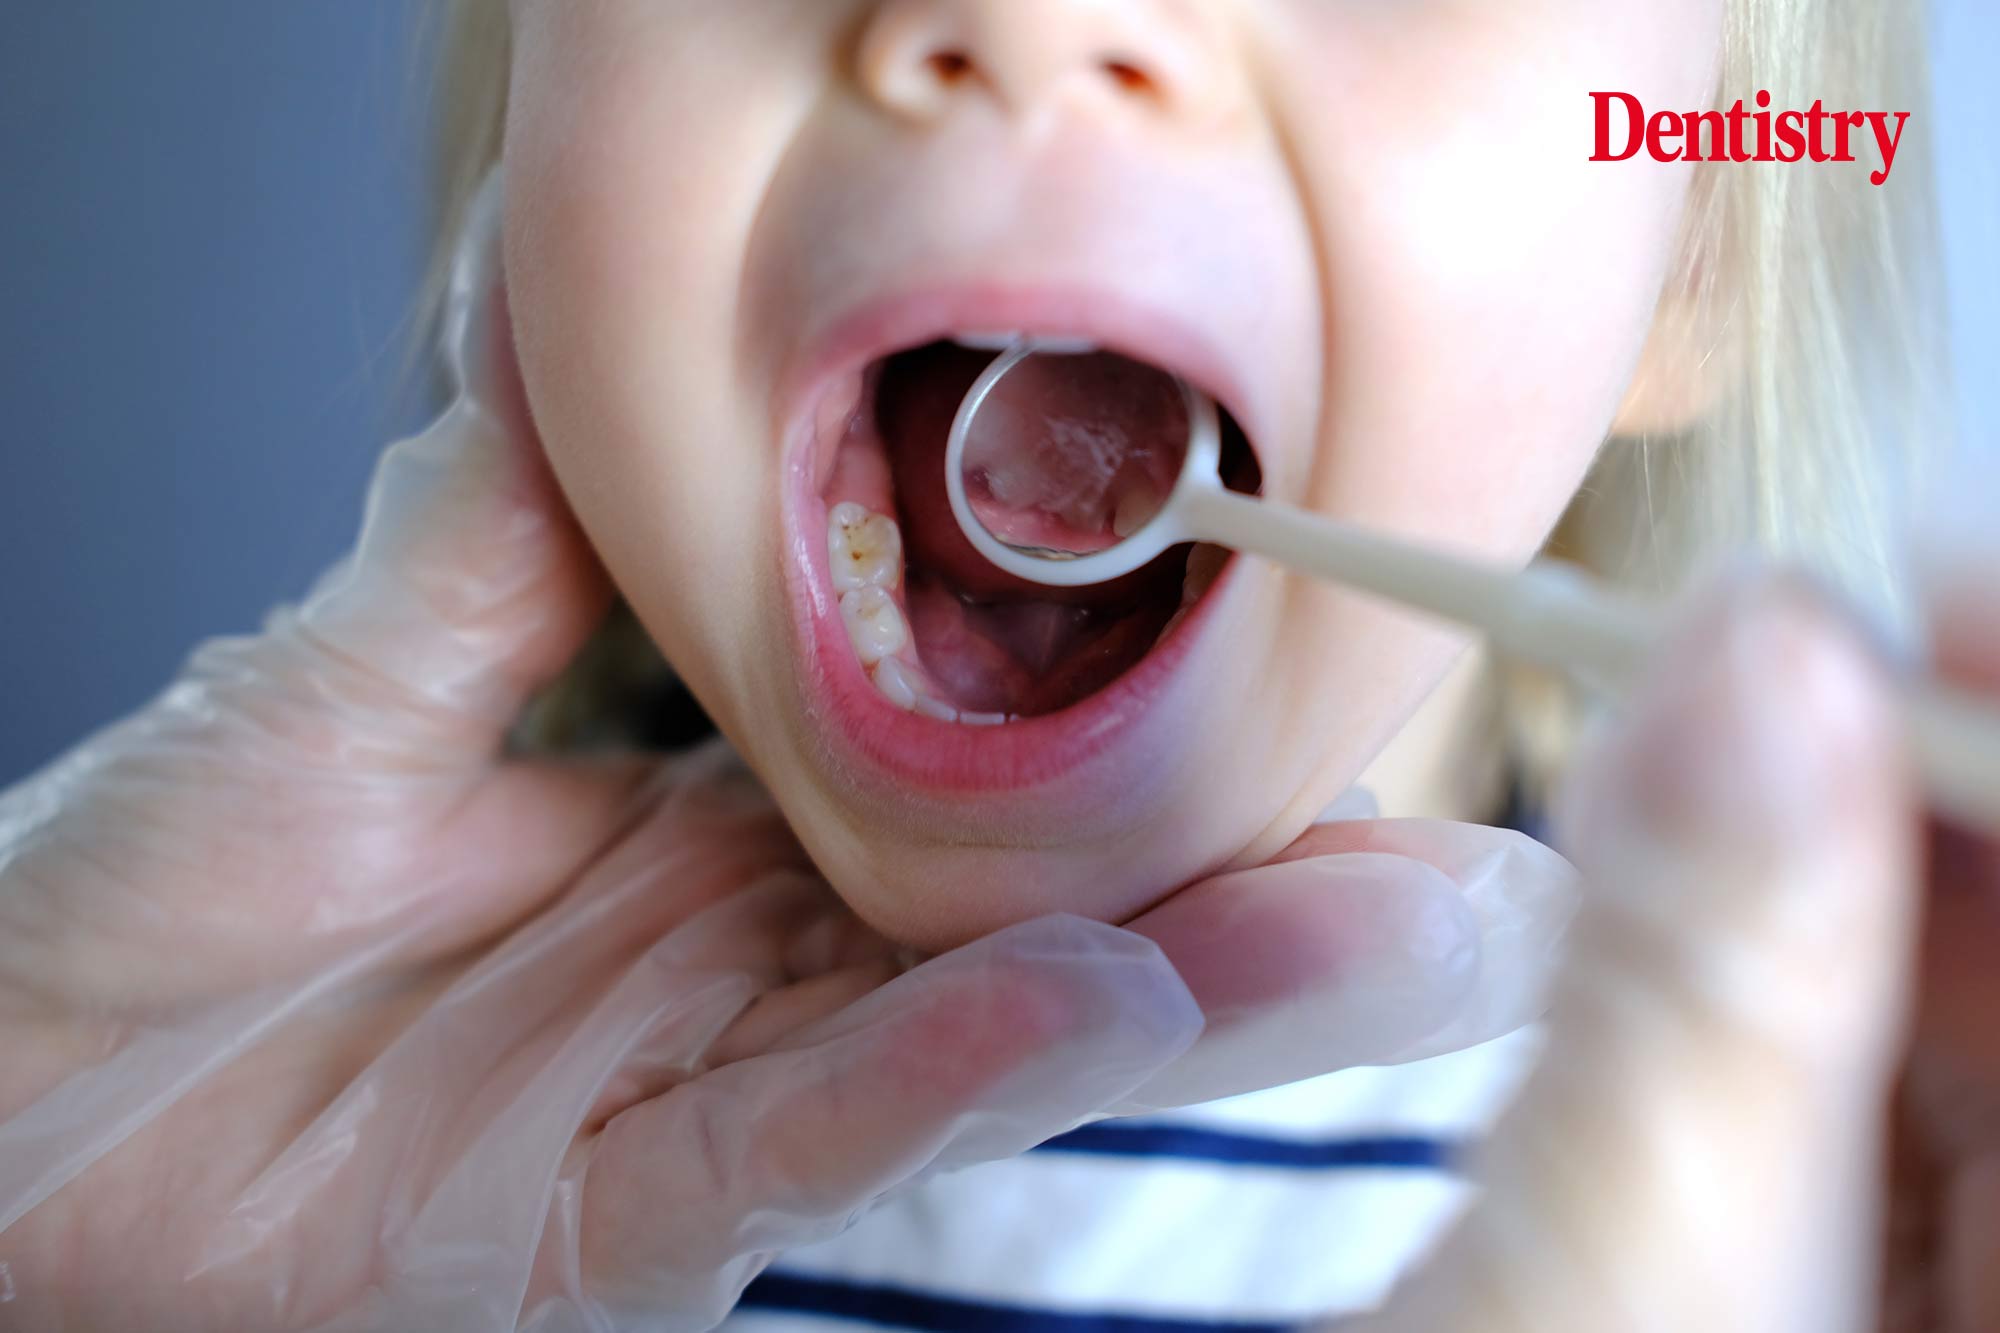 Children’s oral health in England is 'national disgrace', says head of royal college